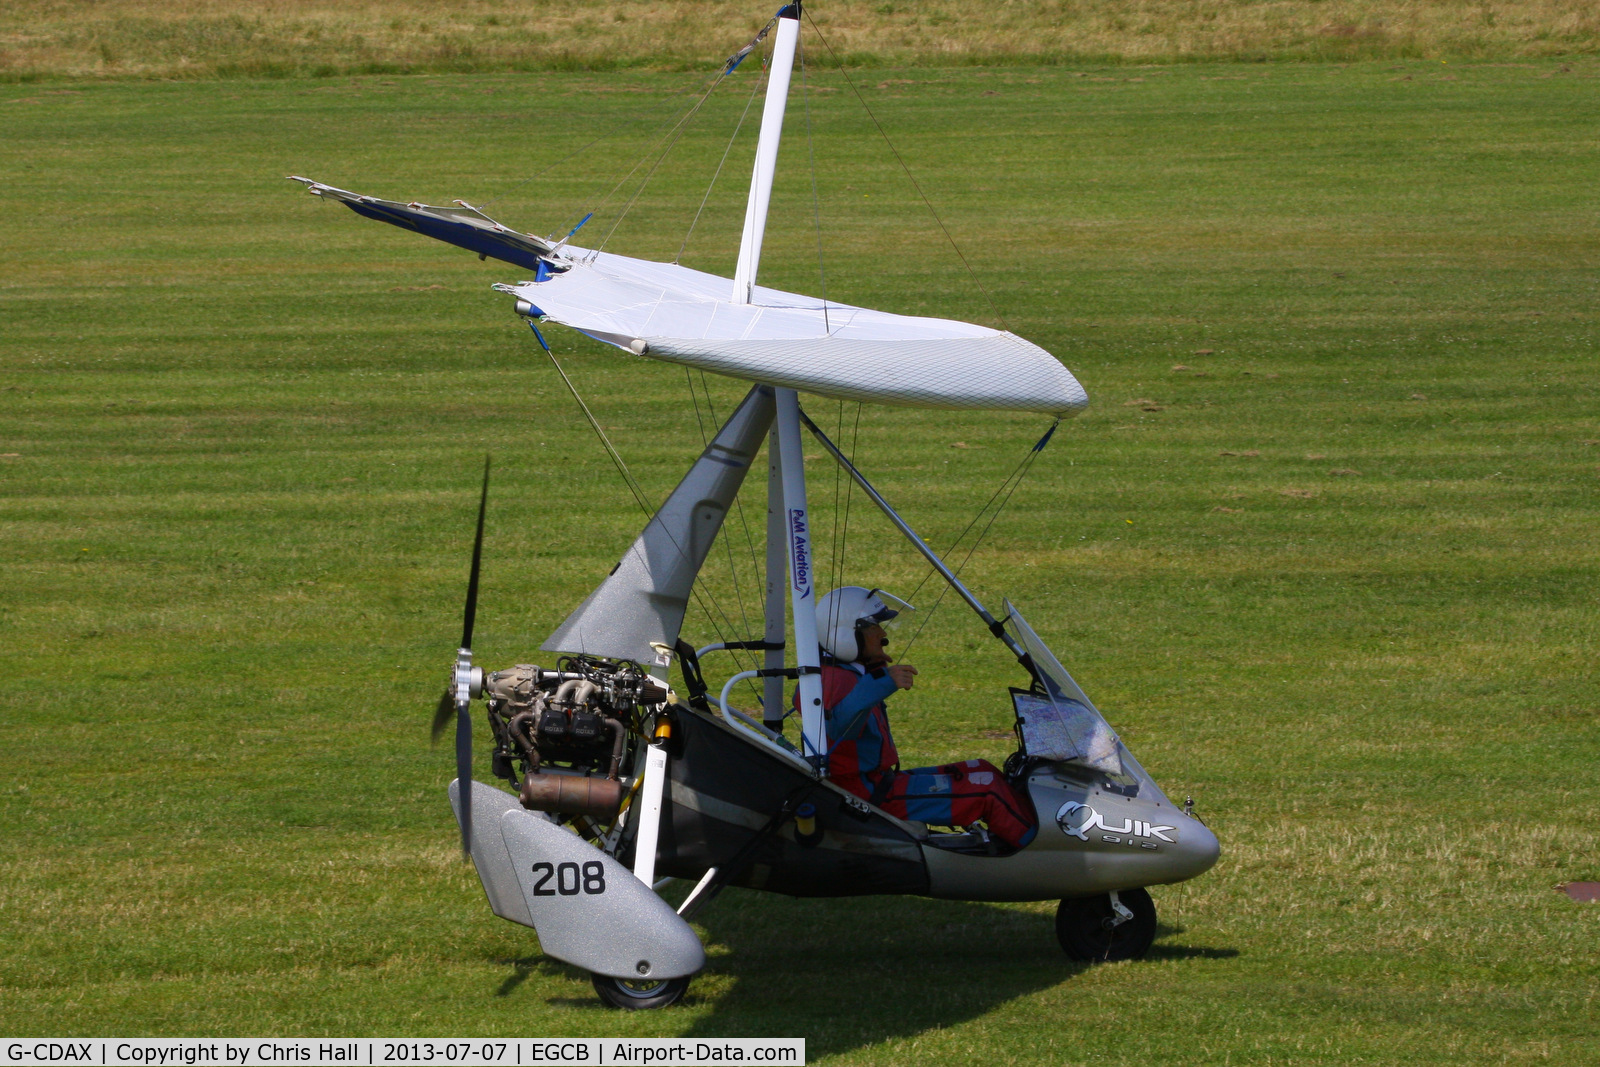 G-CDAX, 2004 Mainair Pegasus Quik C/N 8068, at the Barton open day and fly in